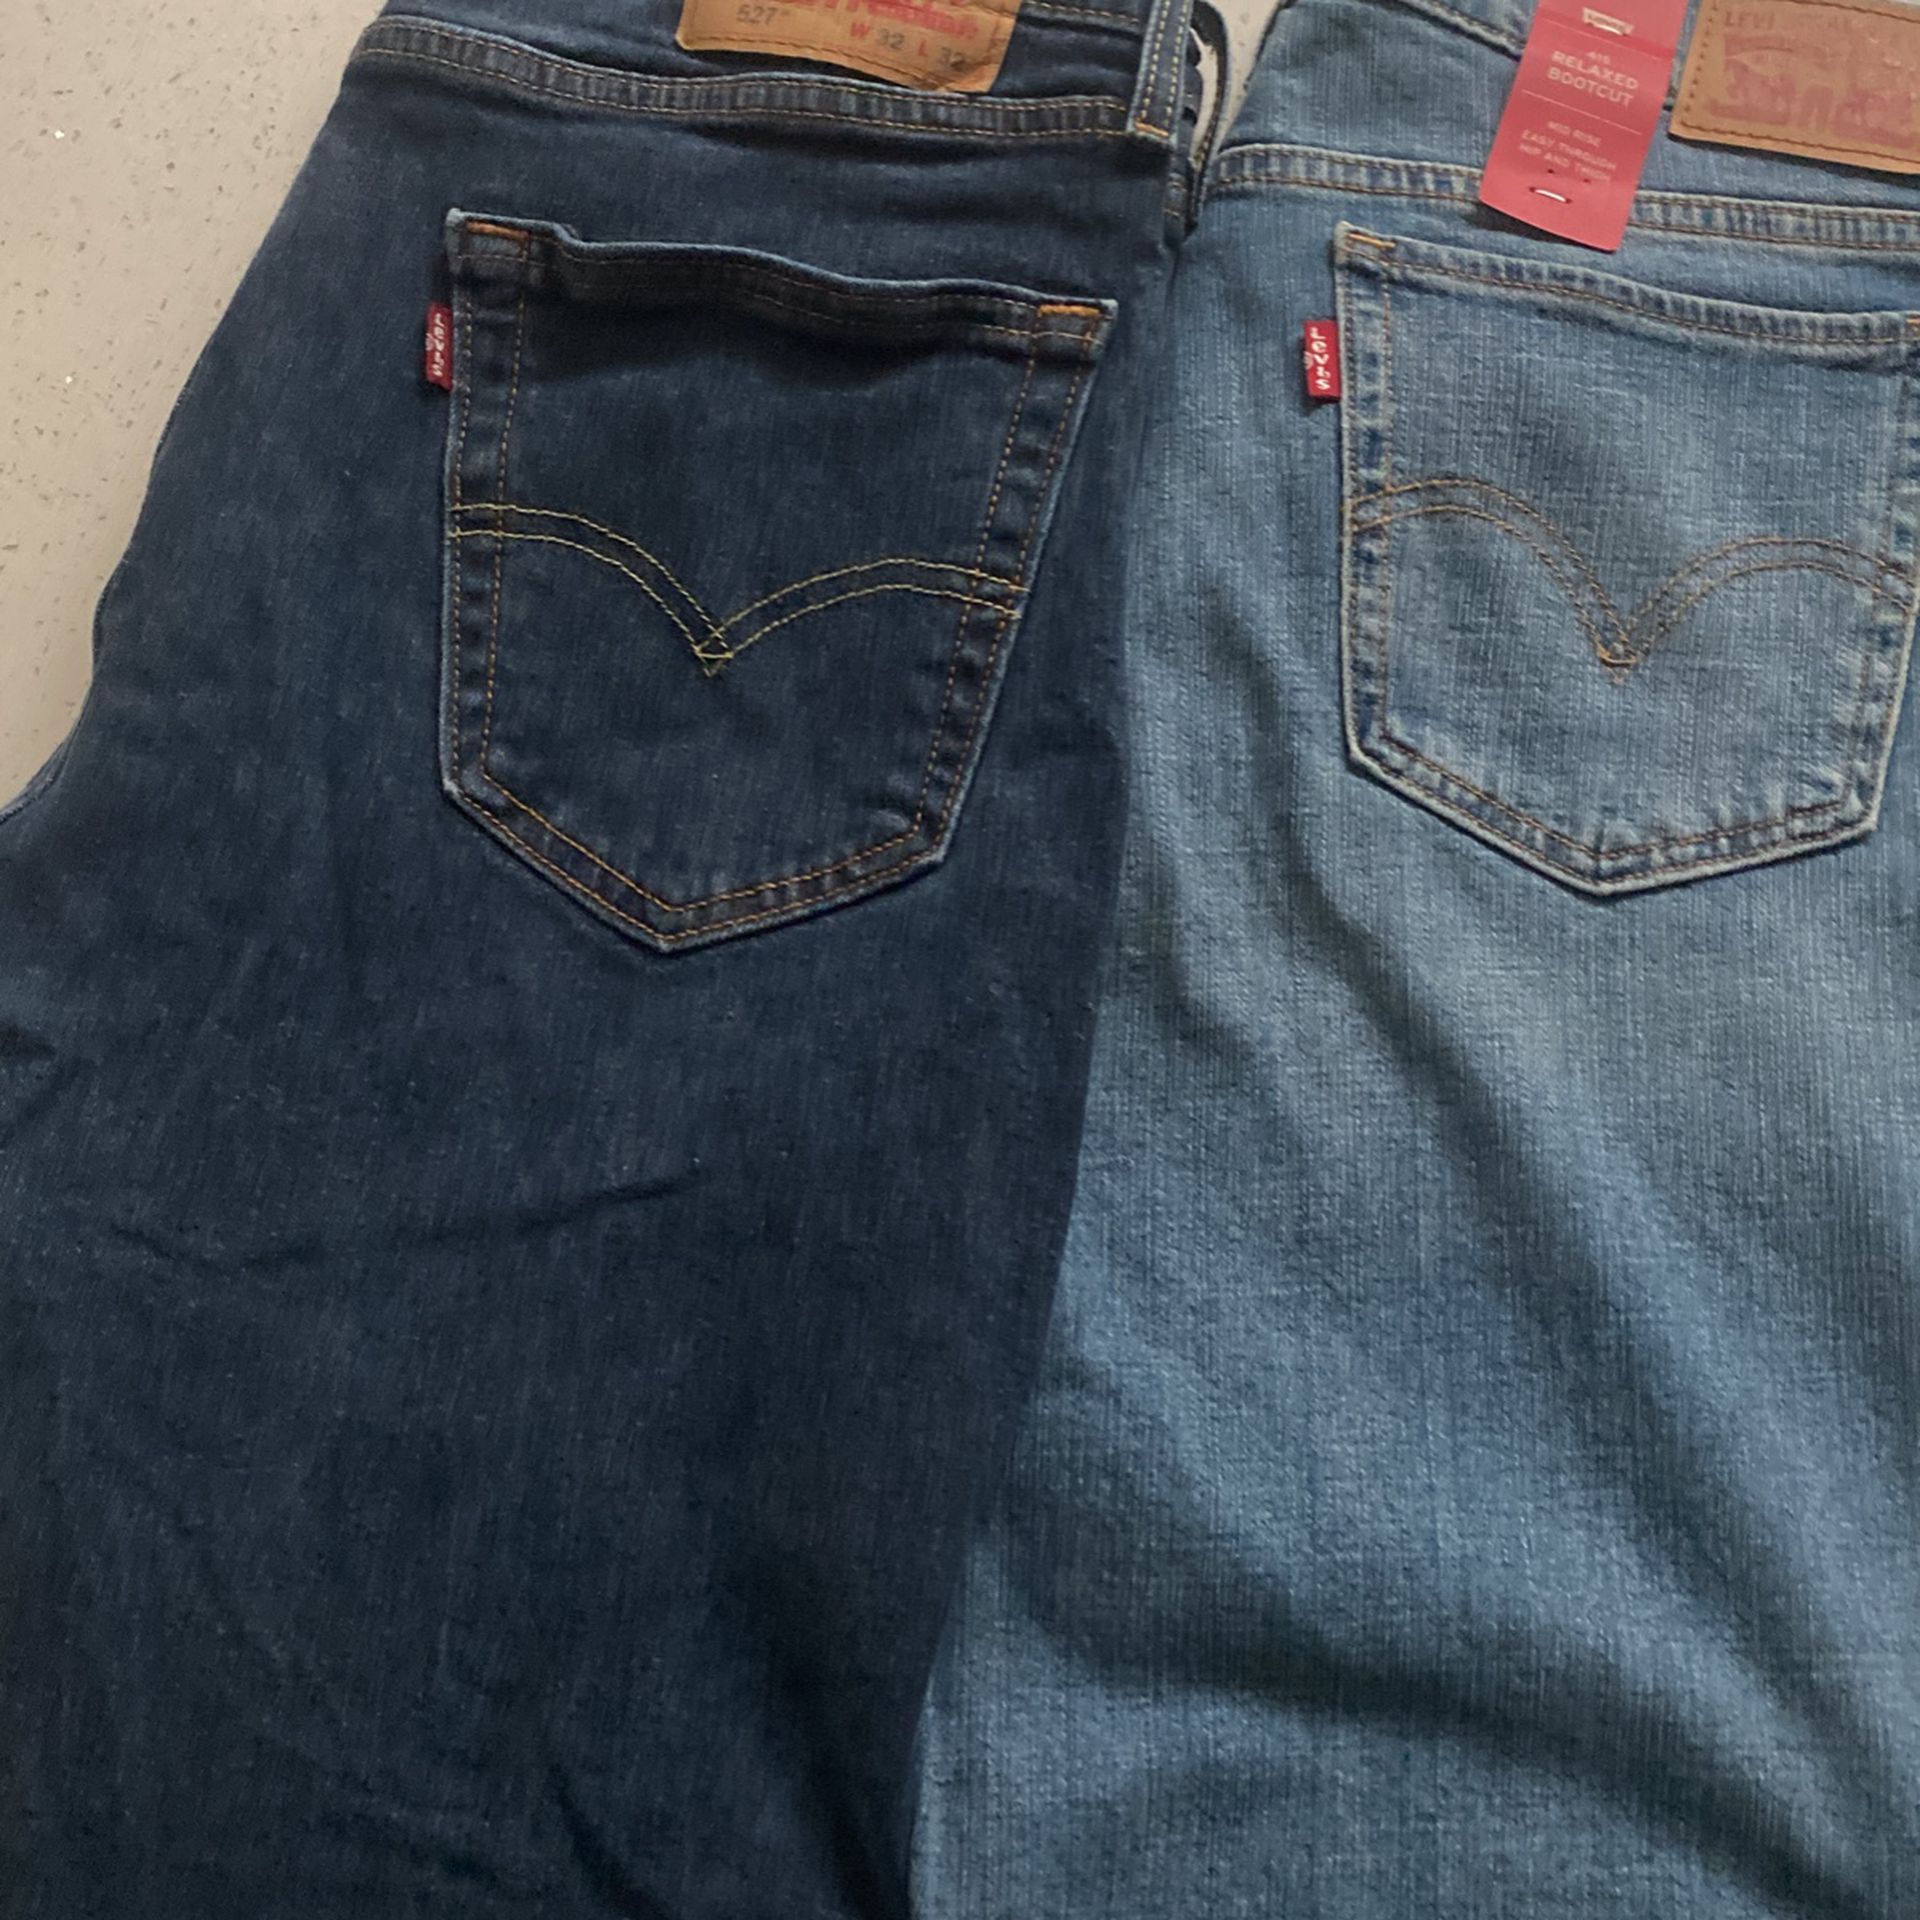 Levi’s Women Size 30x30 And 32x32 $ 30 Both 